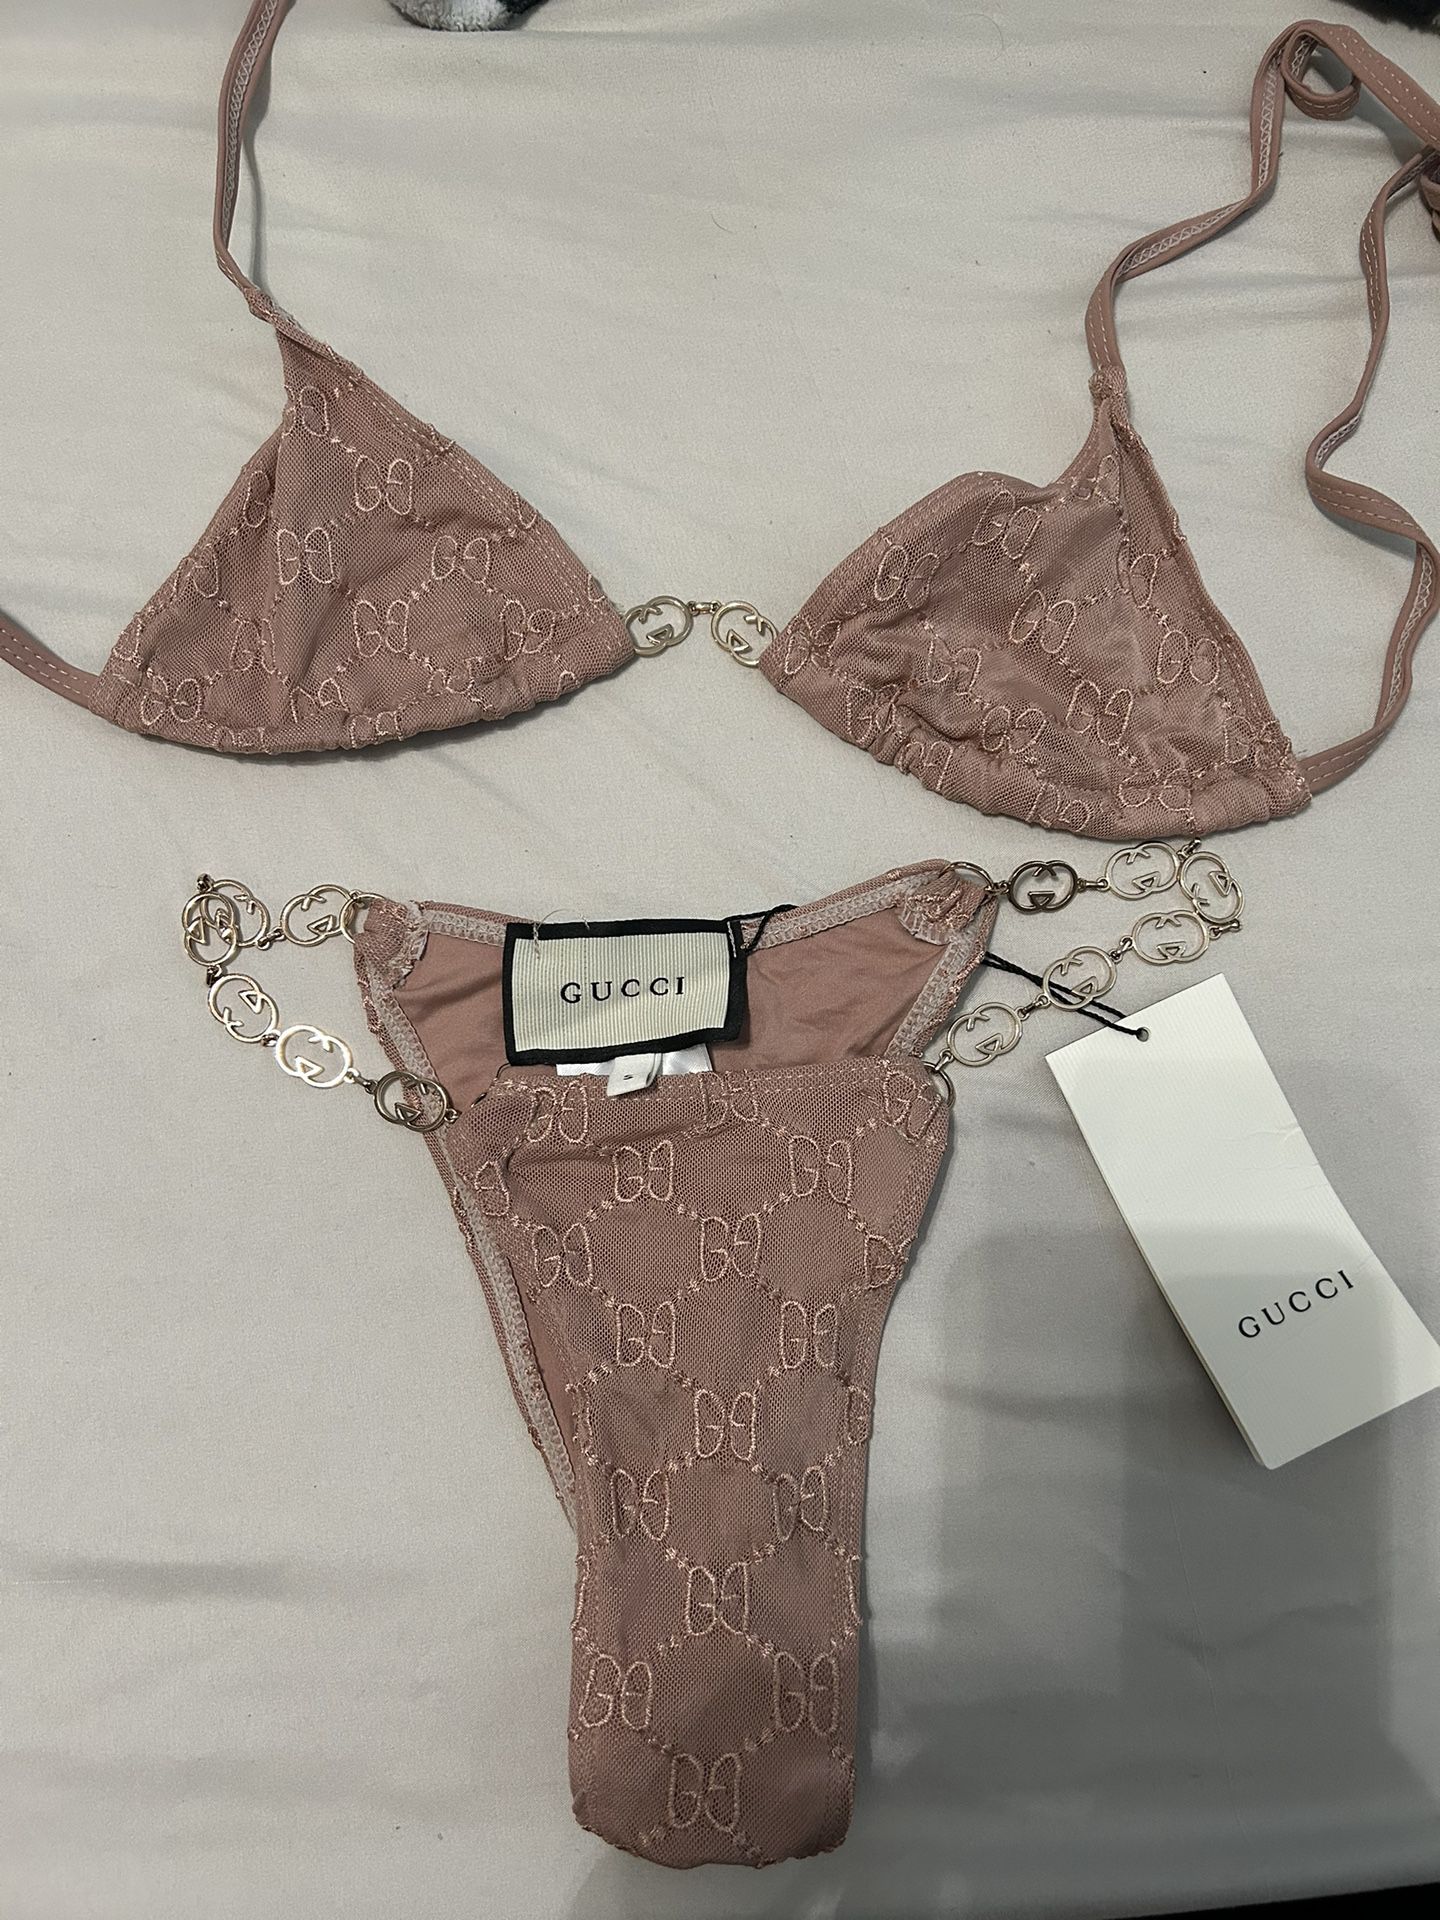 Gucci Bathing Suit for Sale in Stockton, CA - OfferUp